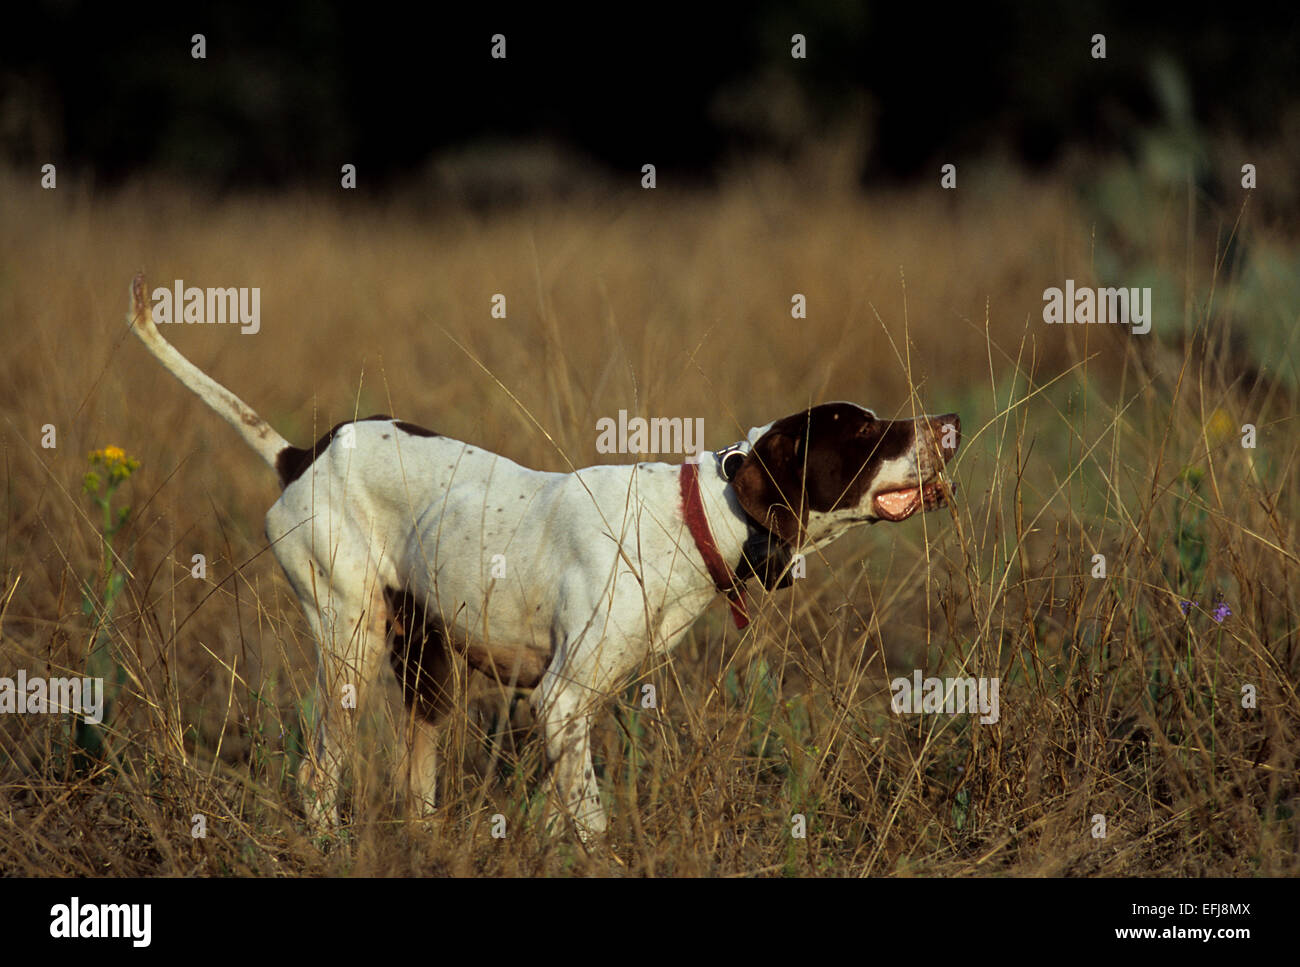 English pointer hunting dog pointing a covey of quail on a hunt in West Texas Stock Photo